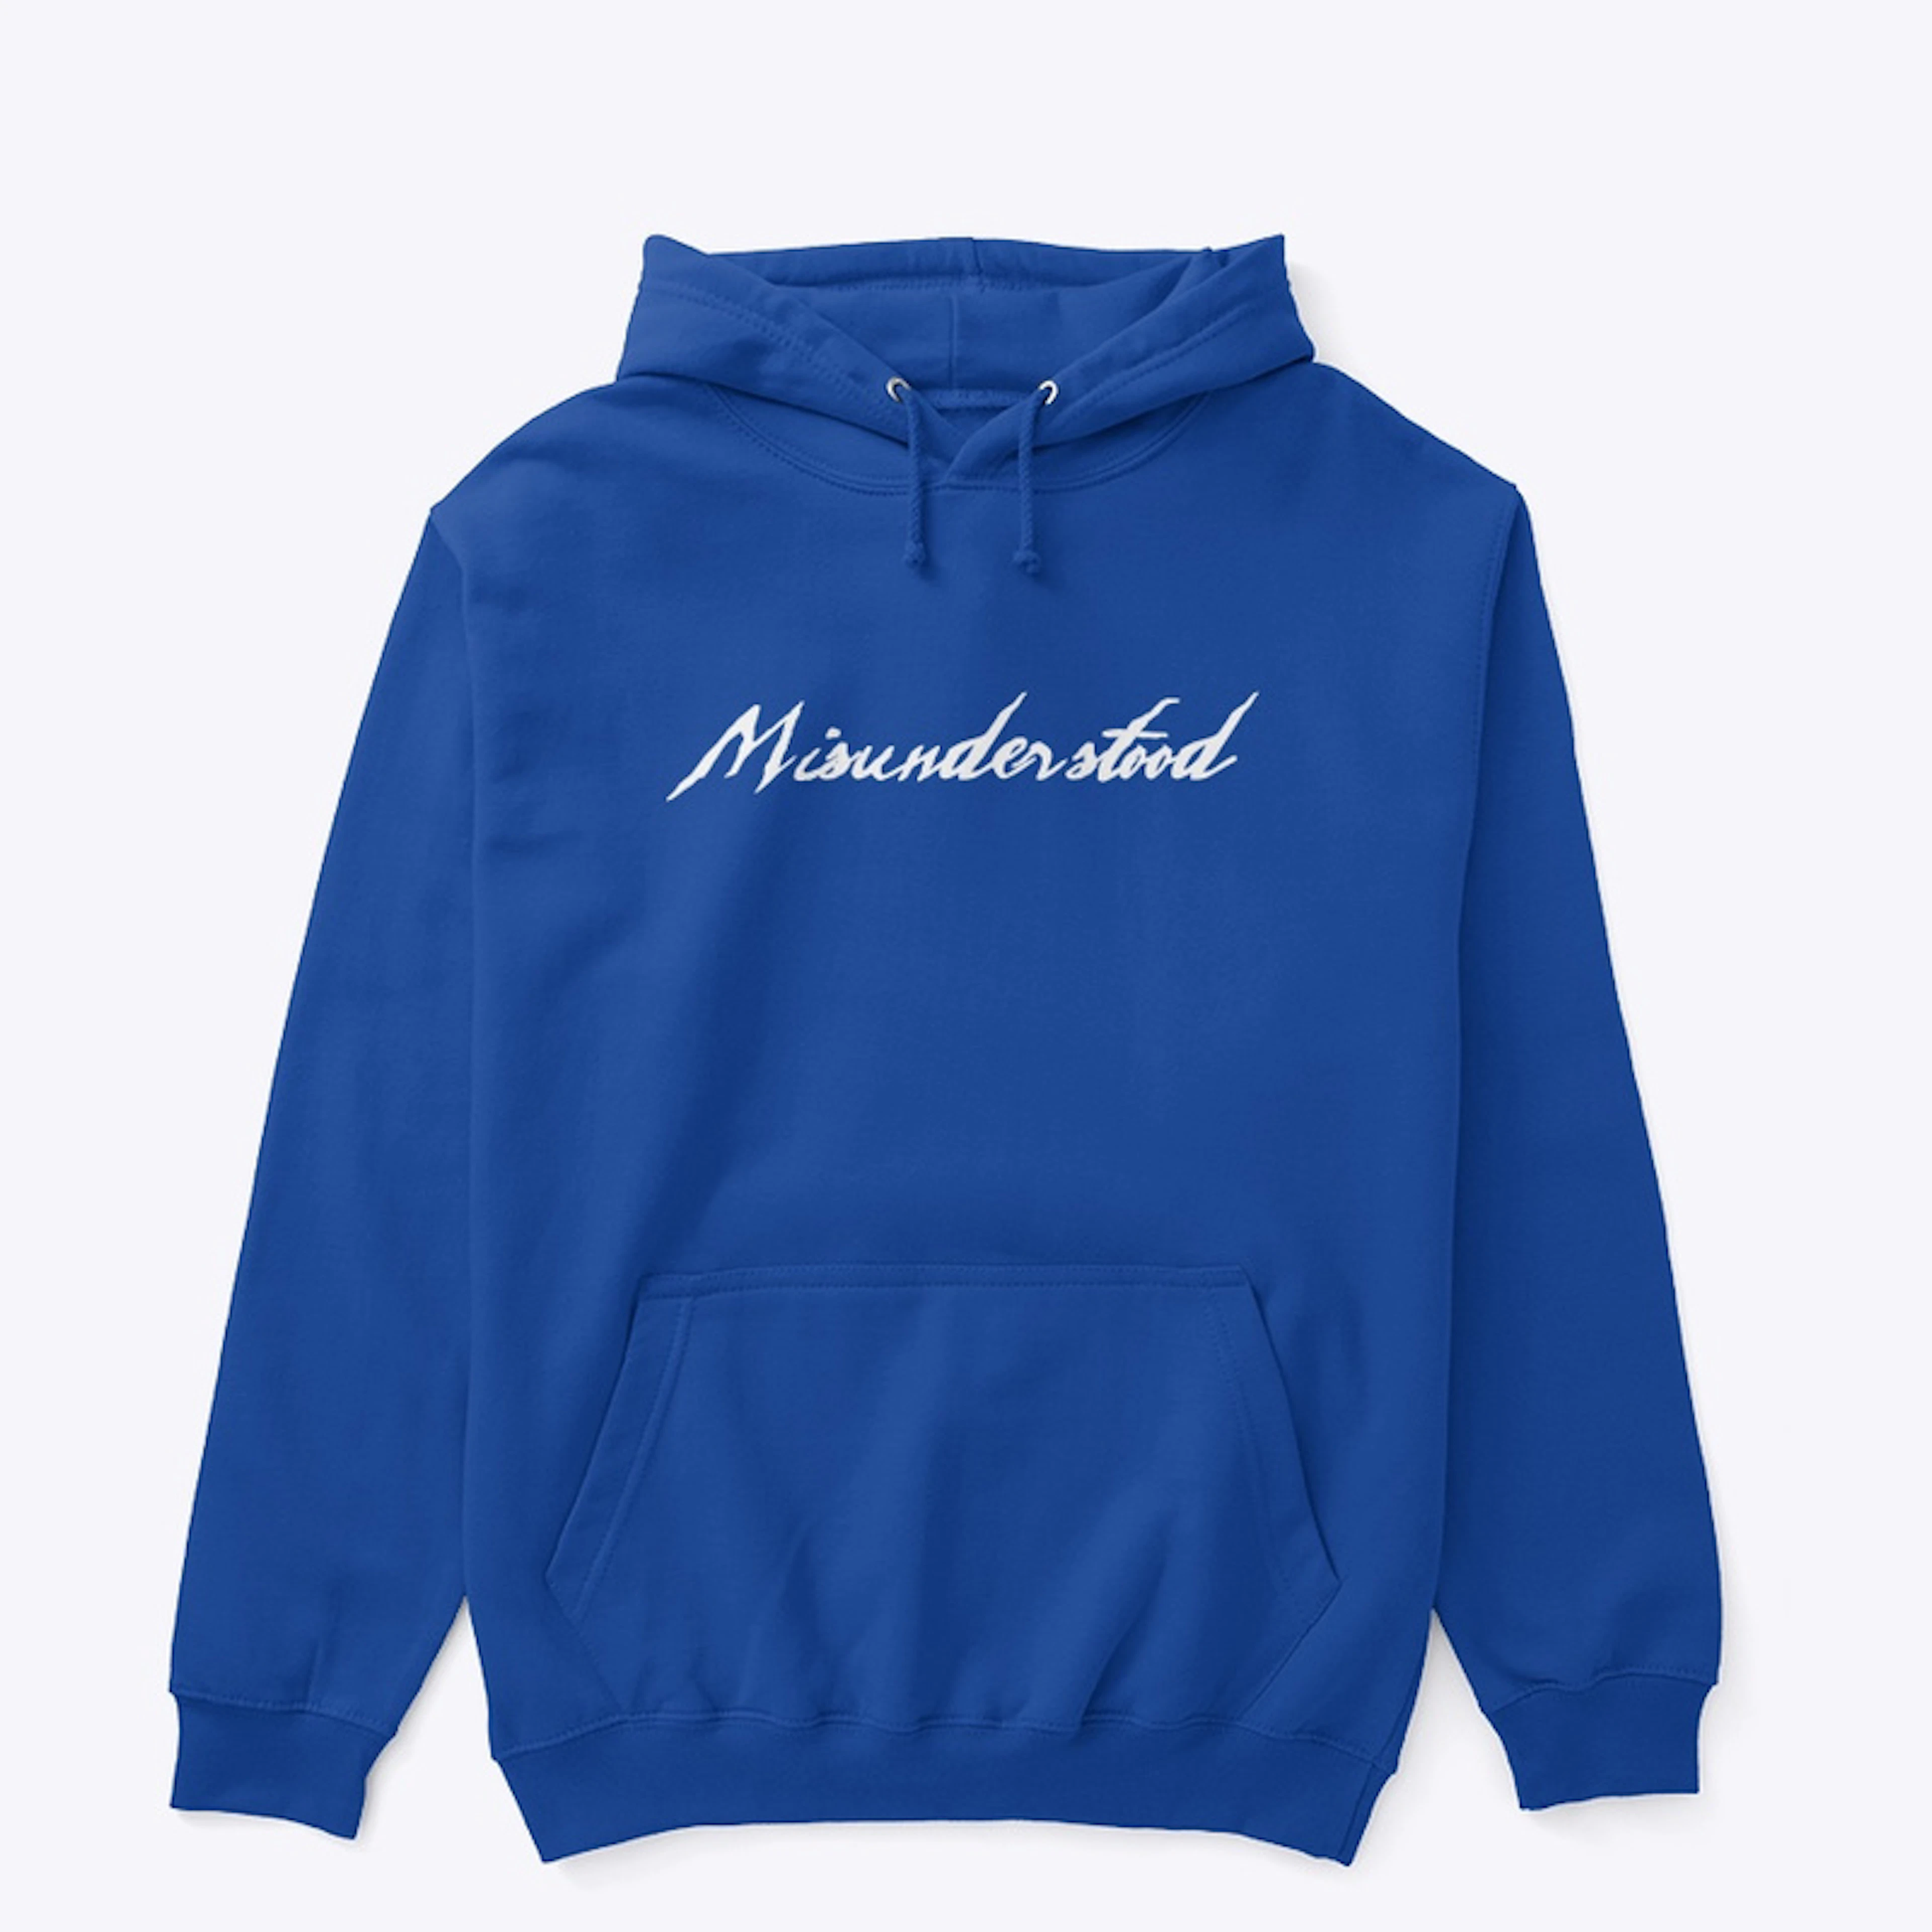 Official "Misunderstood" Collection